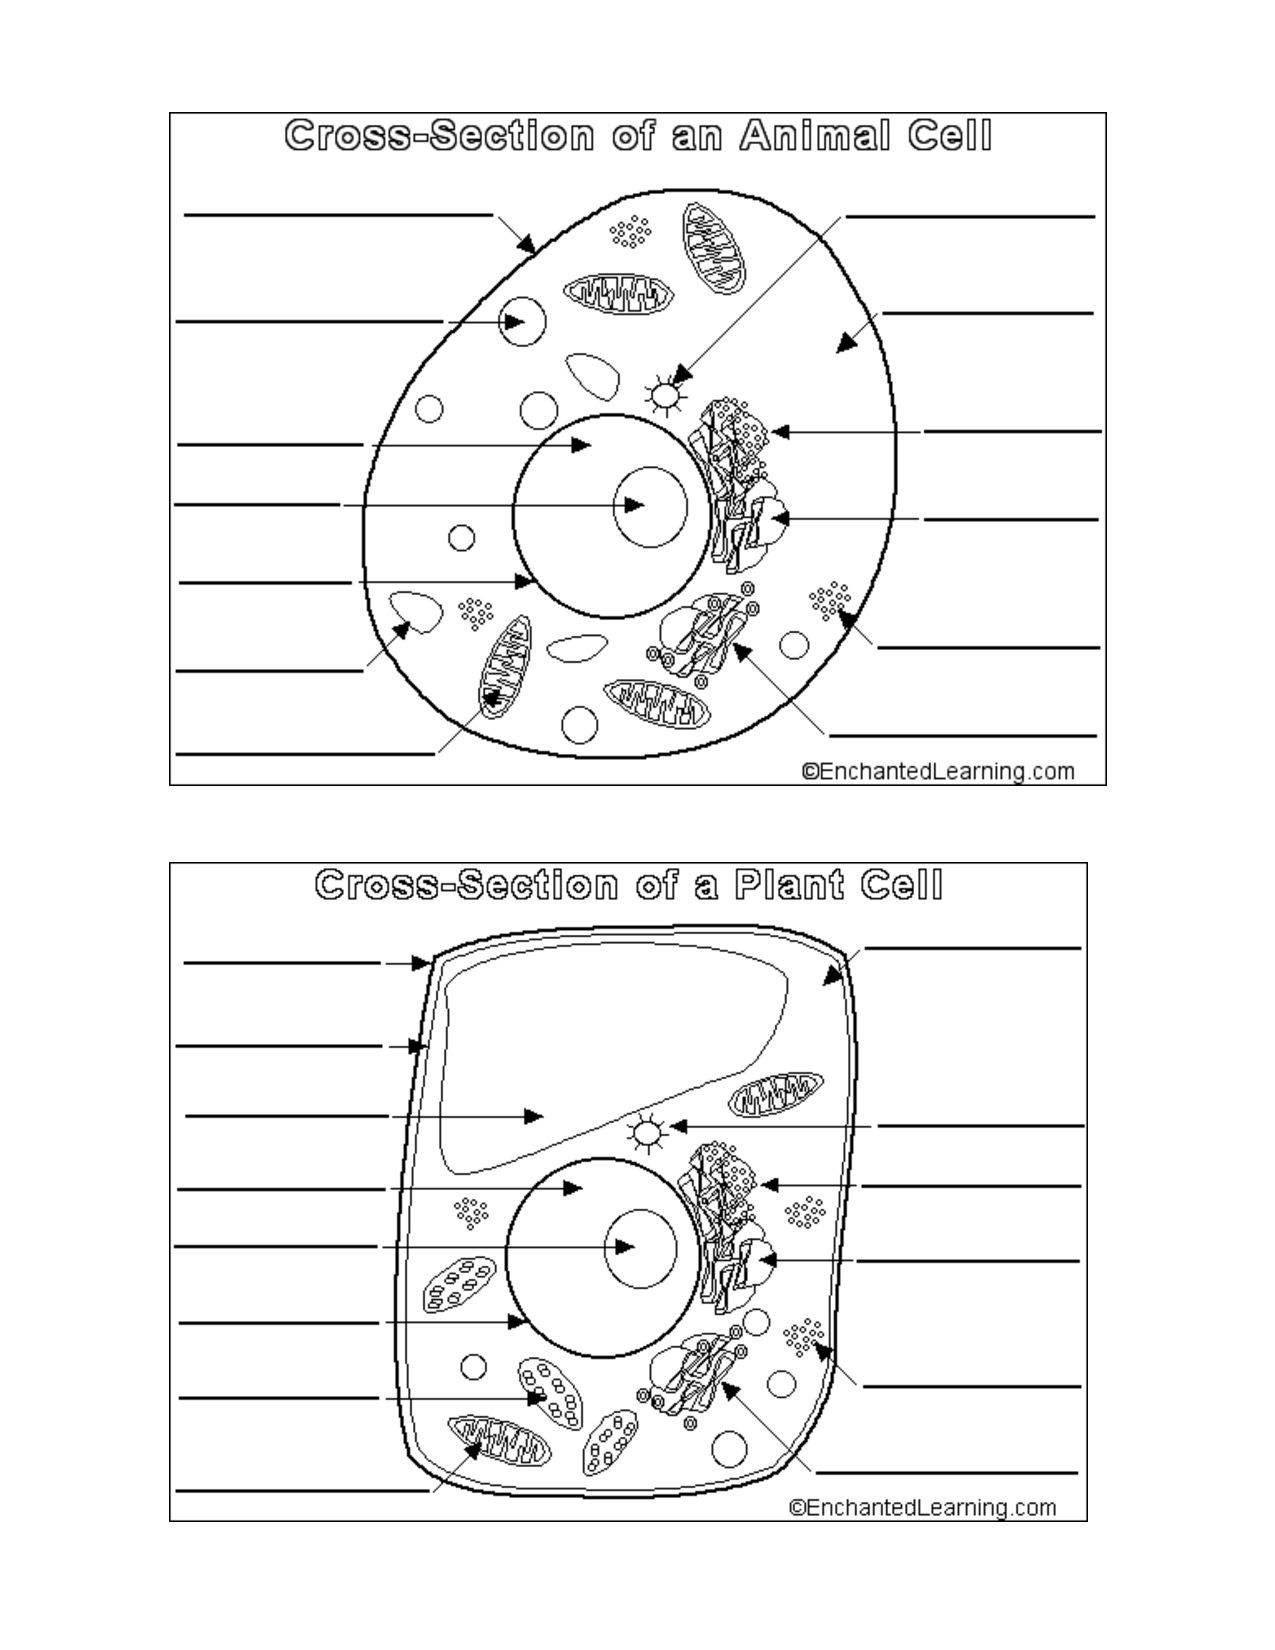 animal cell coloring biology junction biology cell membrane coloring worksheet coloring pages junction animal coloring cell biology 